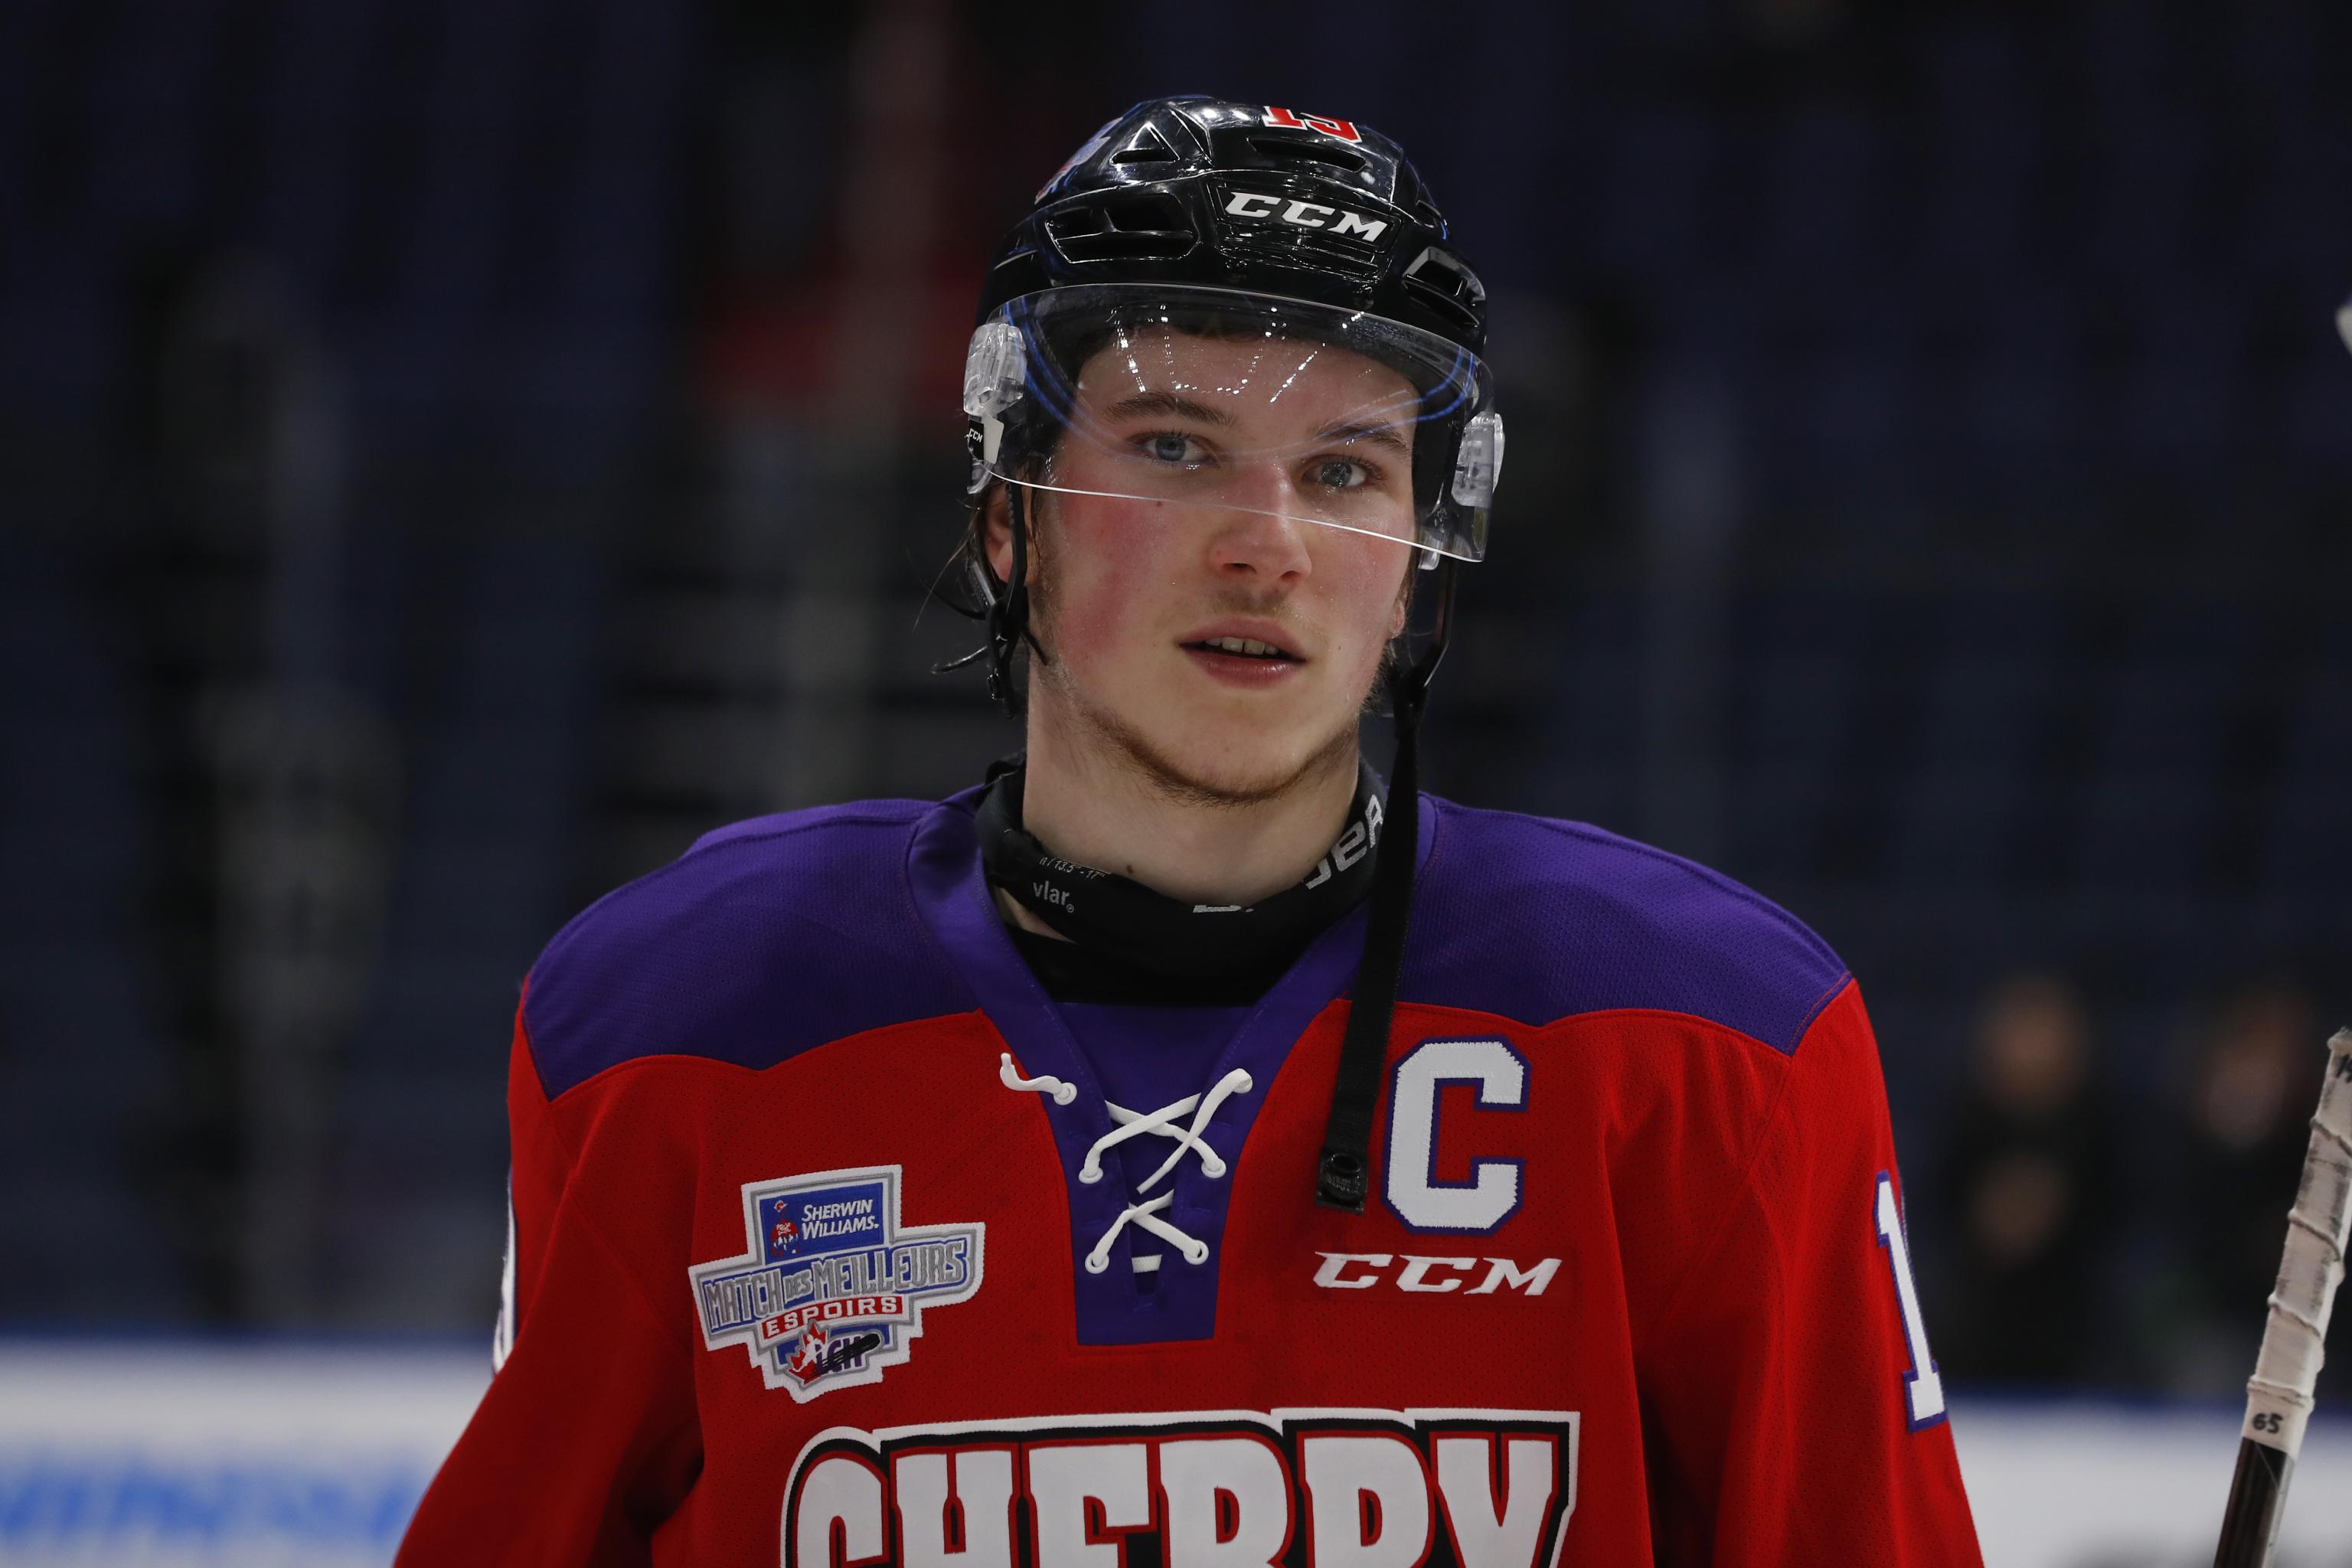 Four players who stood out at the NHL Combine